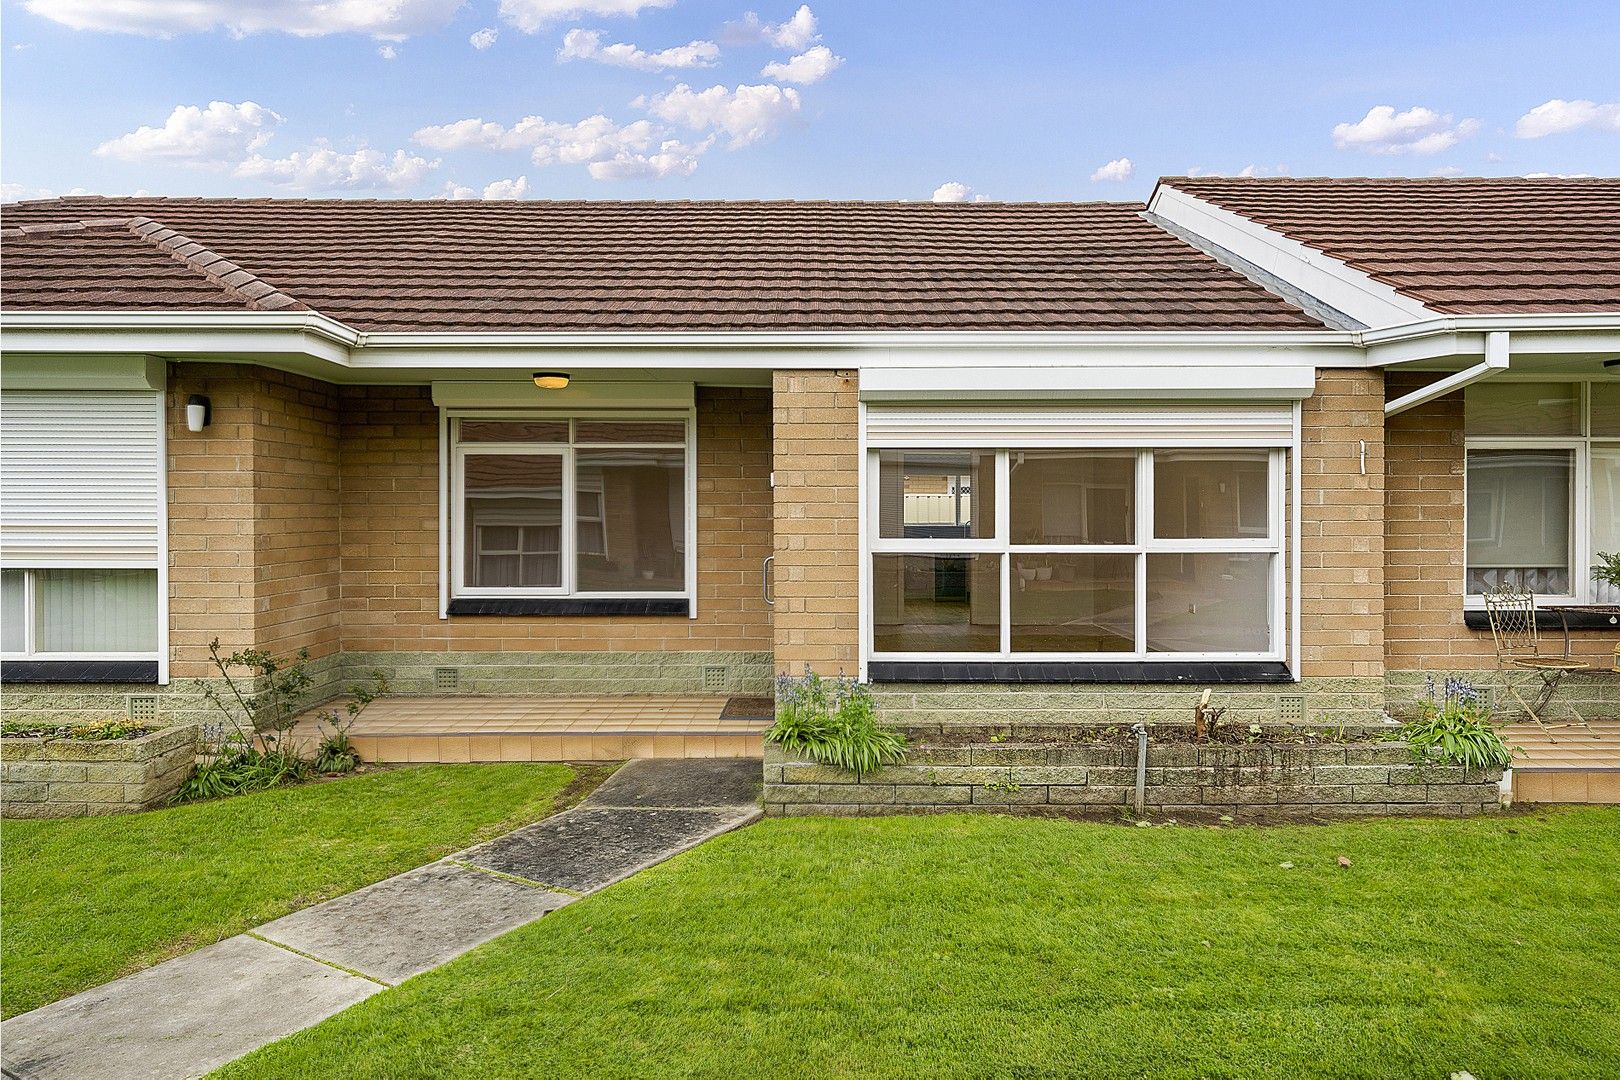 2 bedrooms House in 2/8-/10 Second Avenue GLENELG EAST SA, 5045